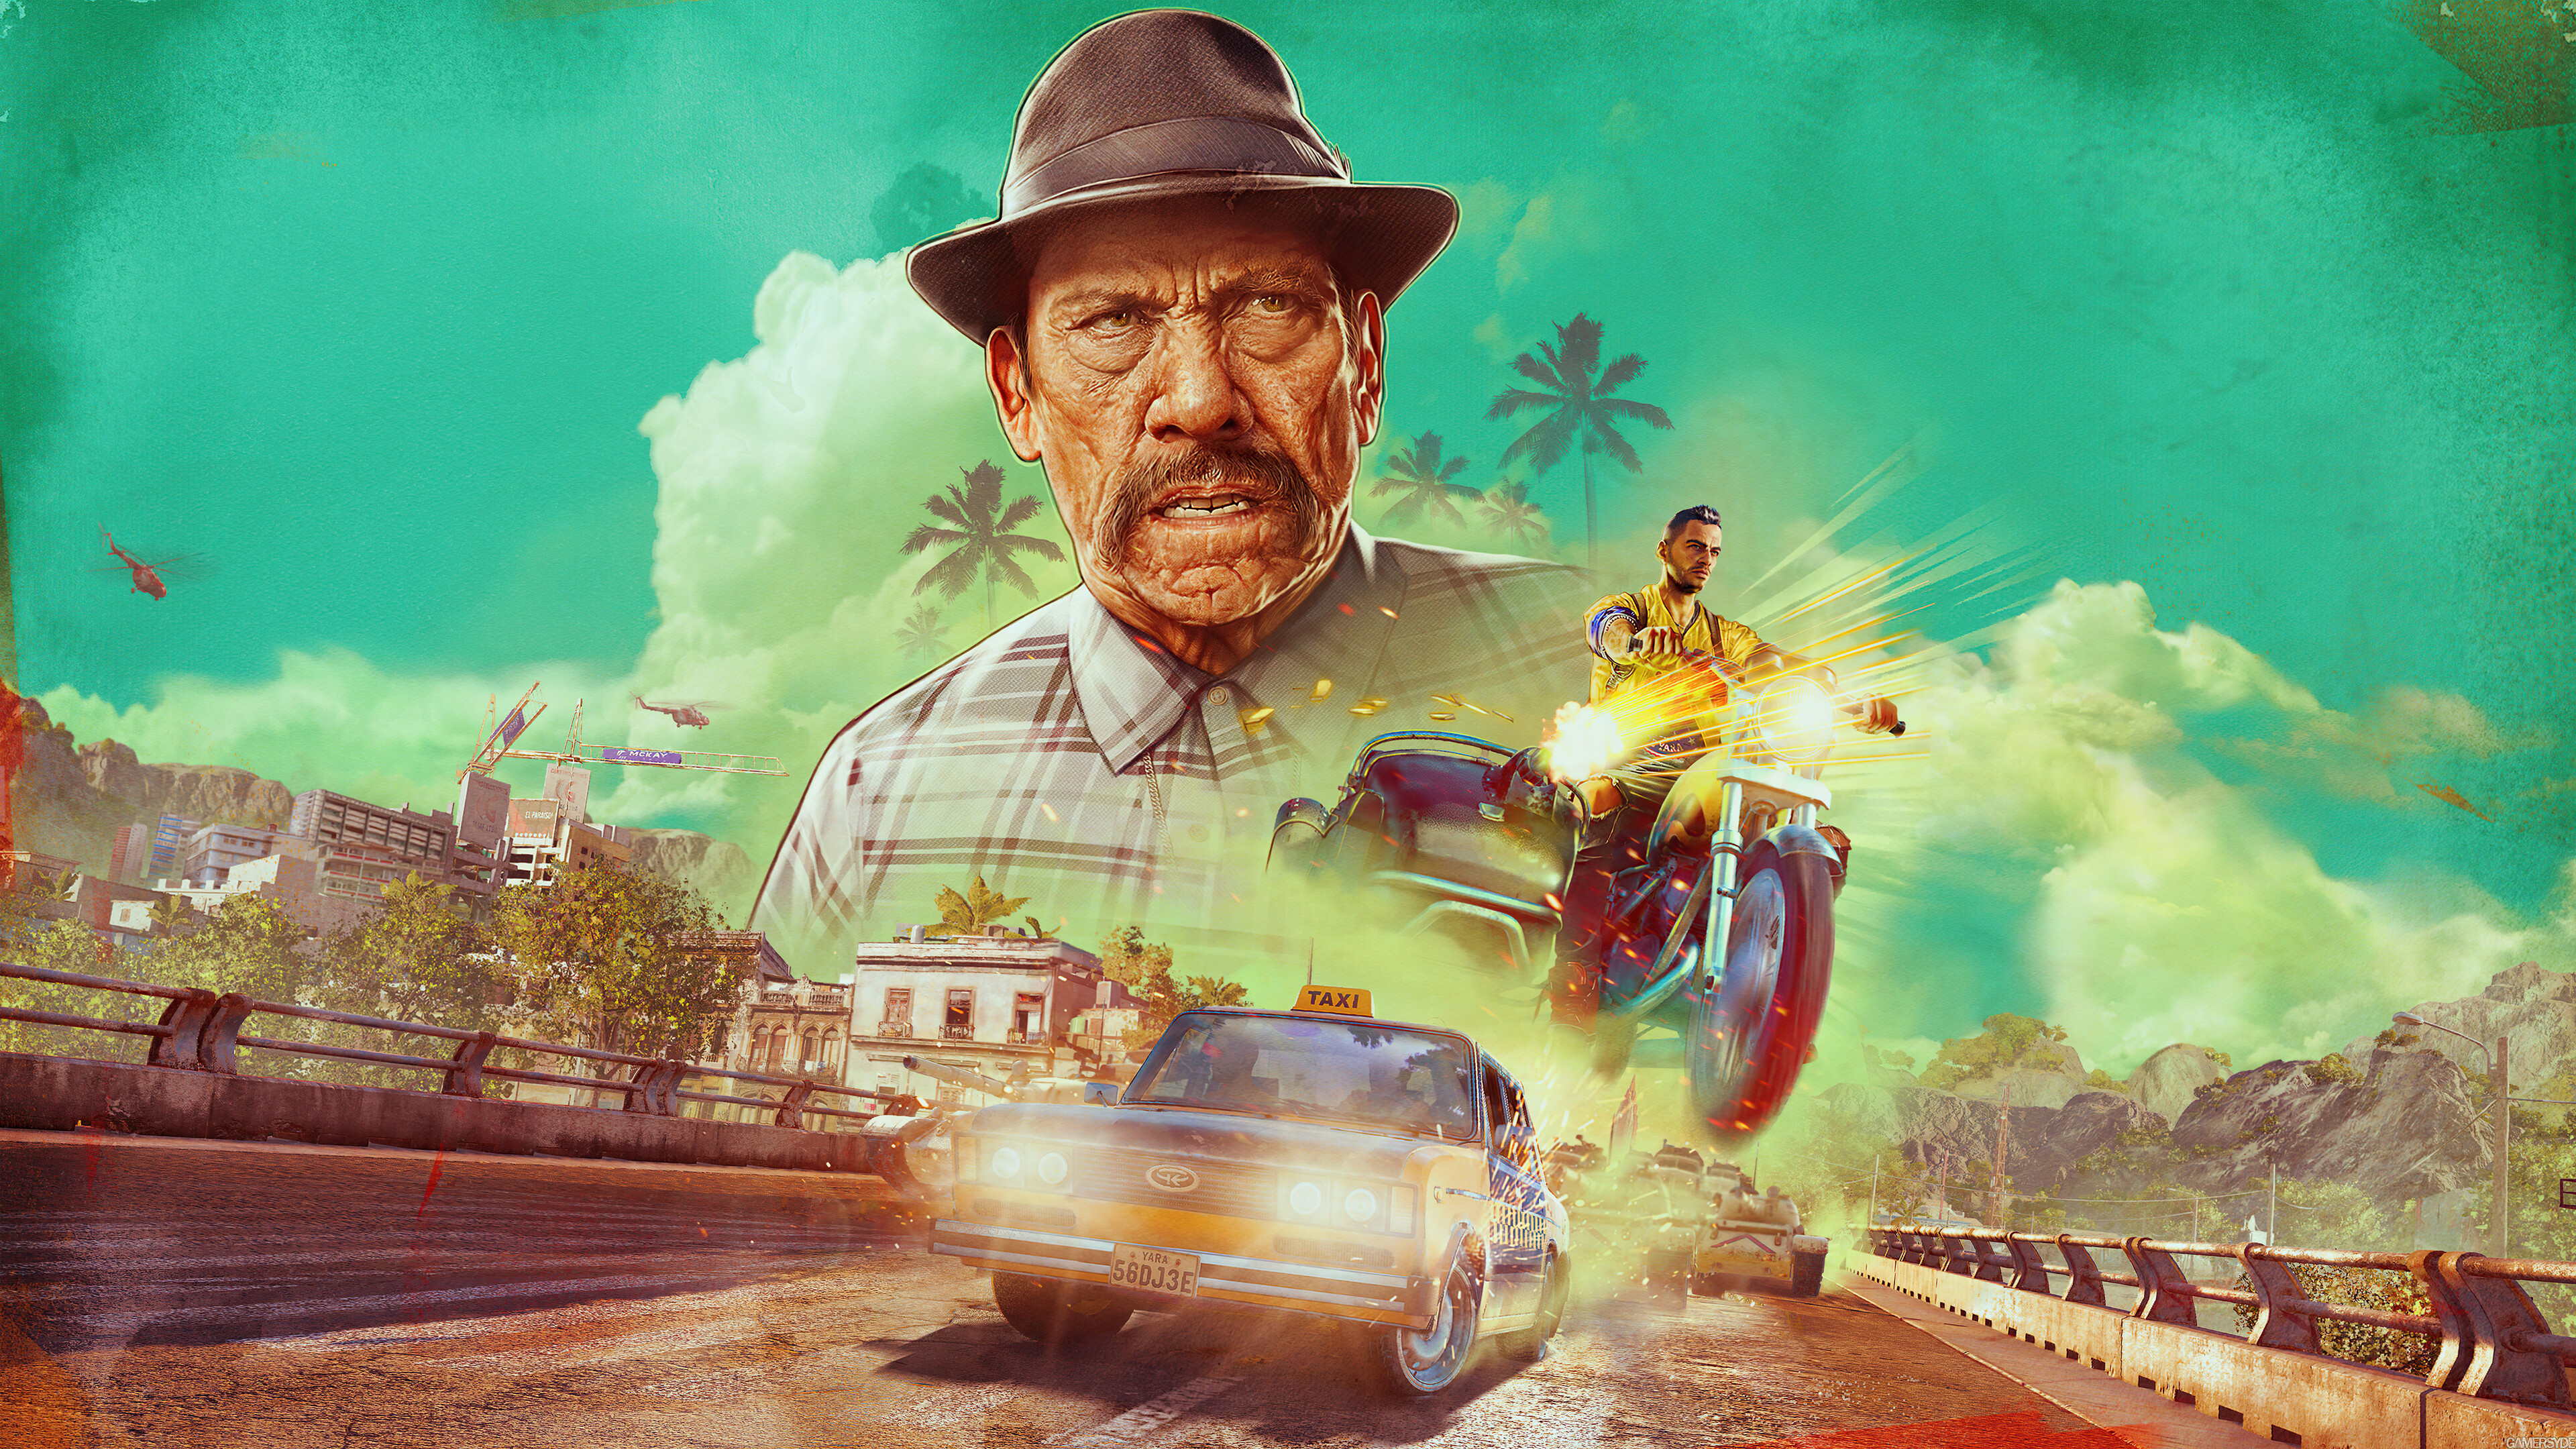 Danny Trejo: Far Cry 6, “Dani & Danny vs. Everyone” mission, Ubisoft, Game for PC and consoles. 3840x2160 4K Background.